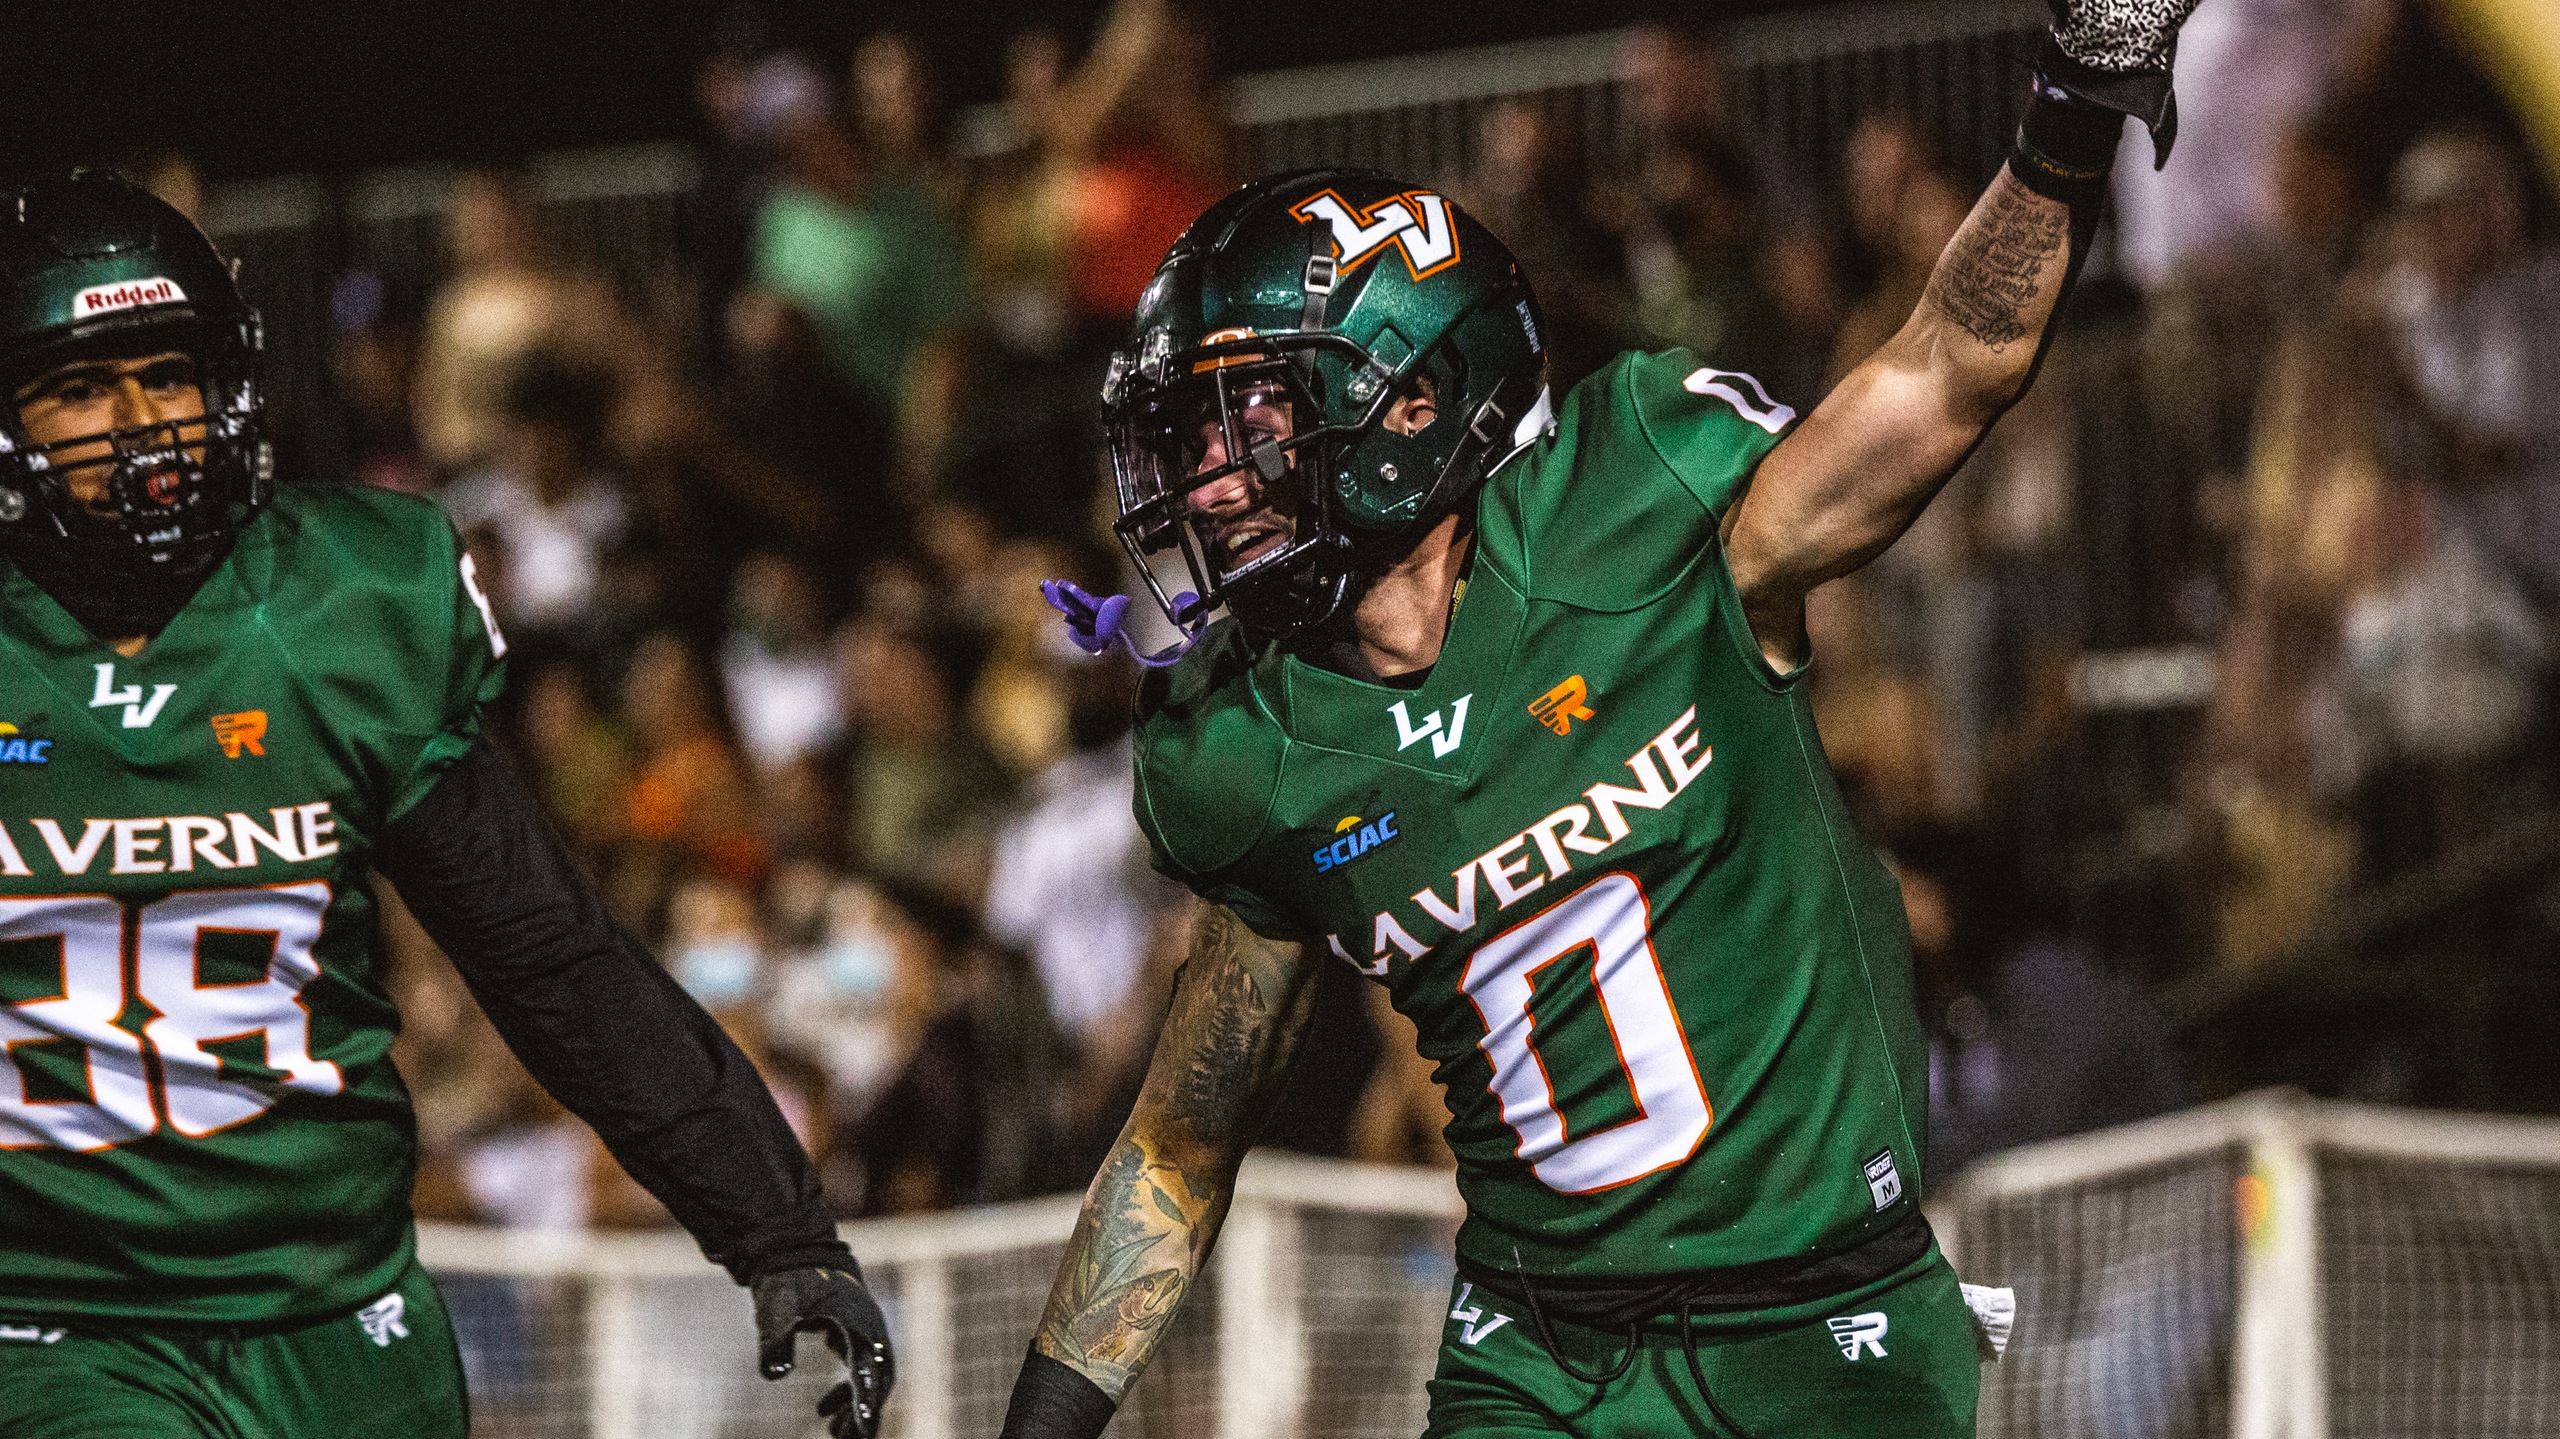 Spencer Pool celebrates after scoring a 79-yard touchdown reception in La Verne's 42-0 win over Whittier.